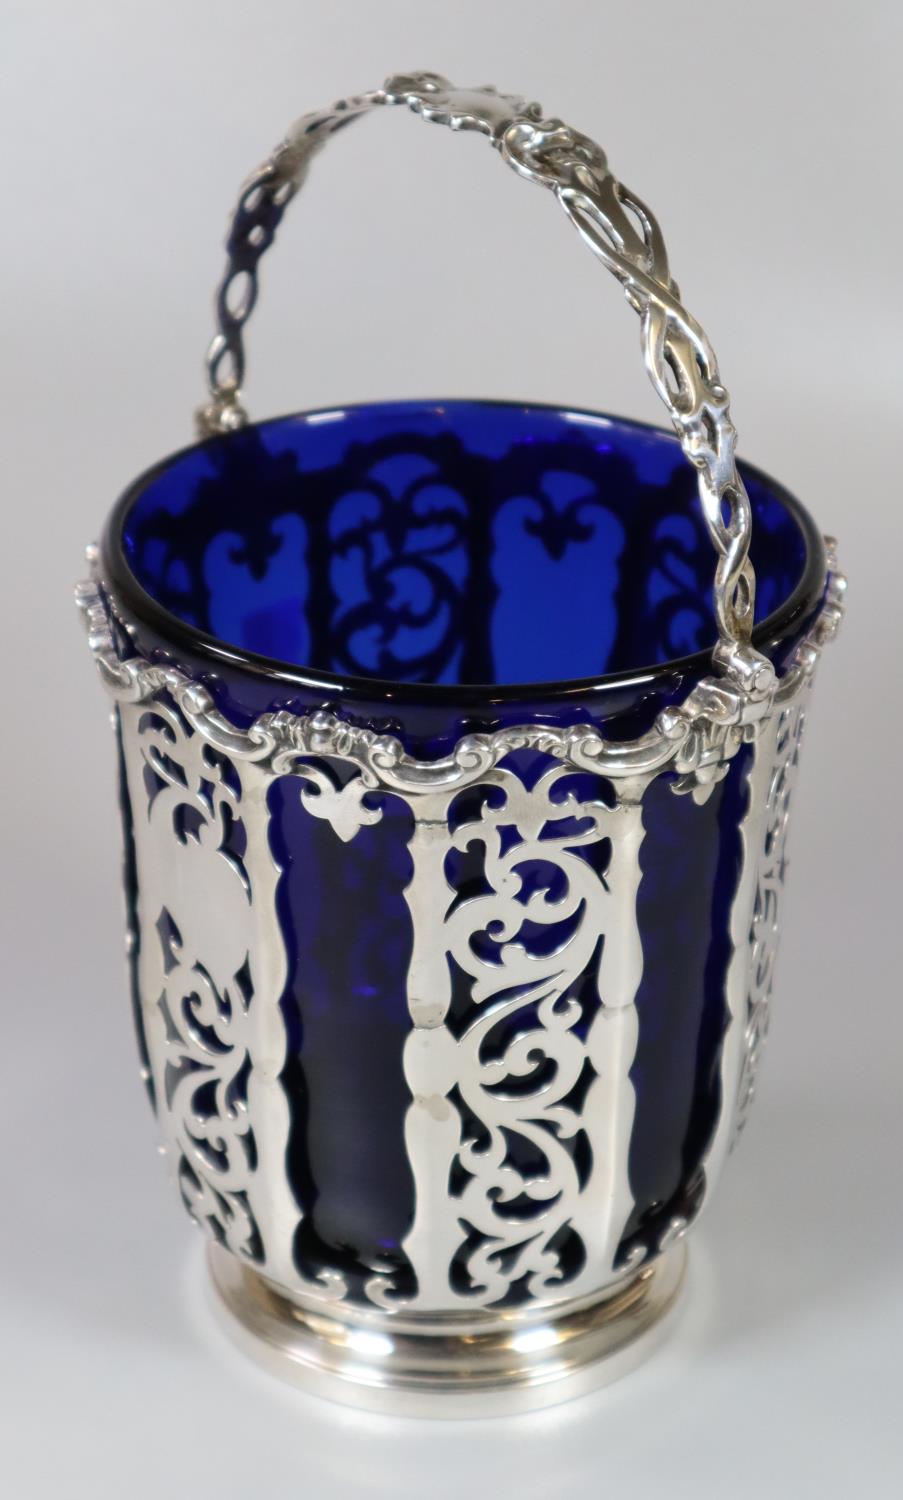 Victorian silver and pierced basket with swing handle and Bristol Blue glass liner by George John - Image 2 of 2